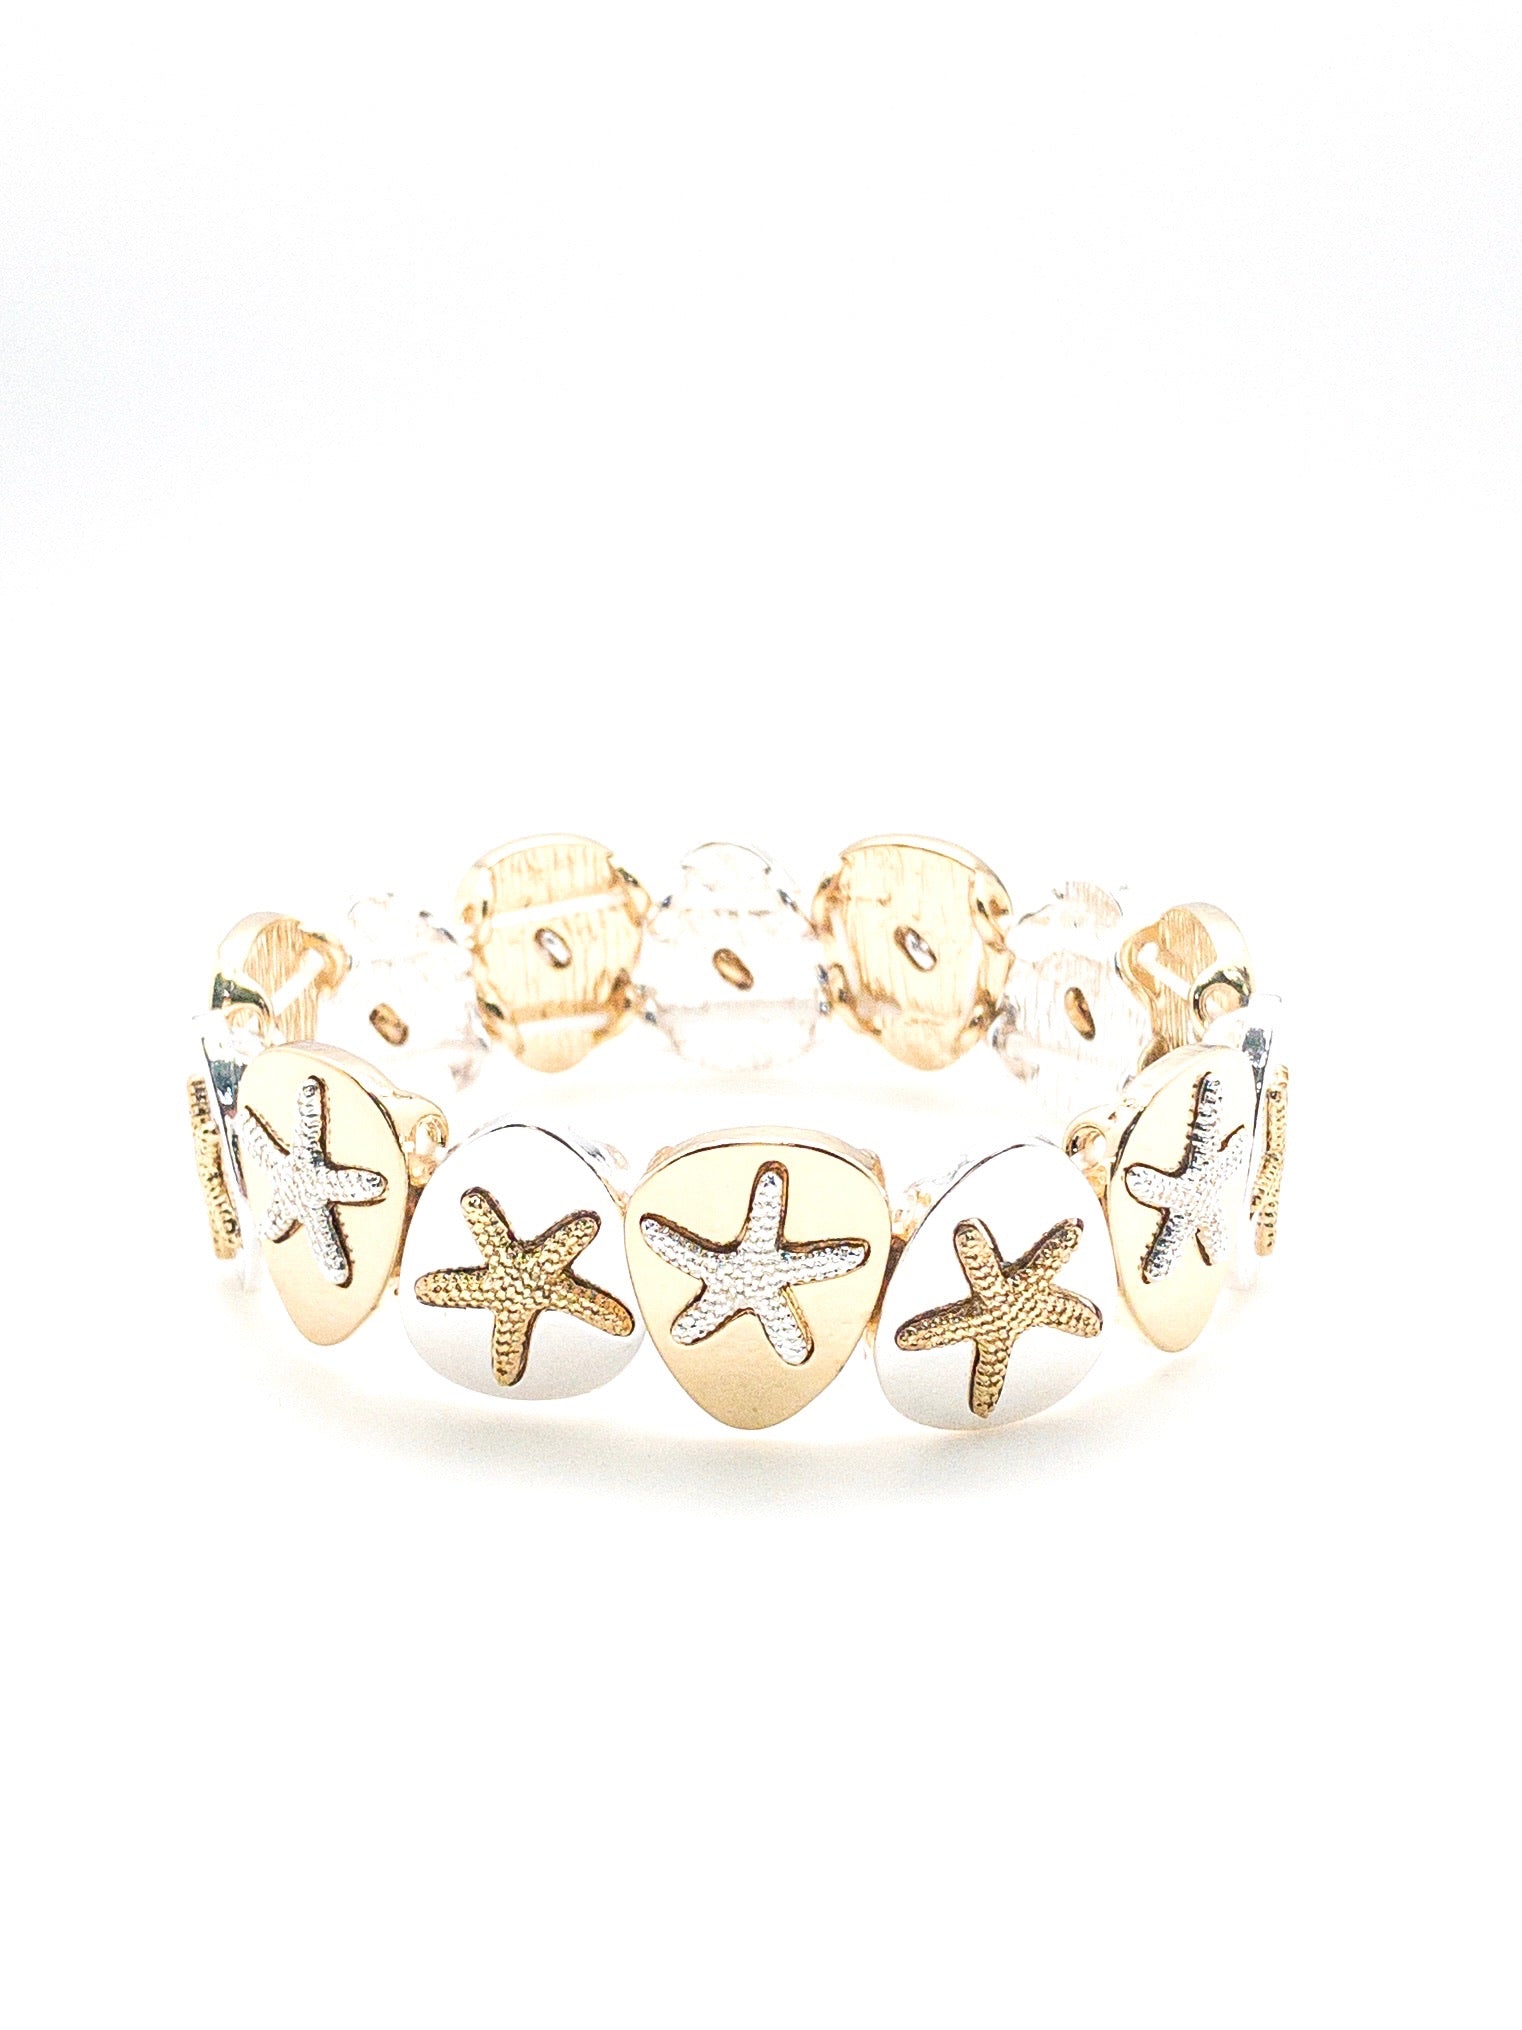 Starfish bracelet- gold and silver 